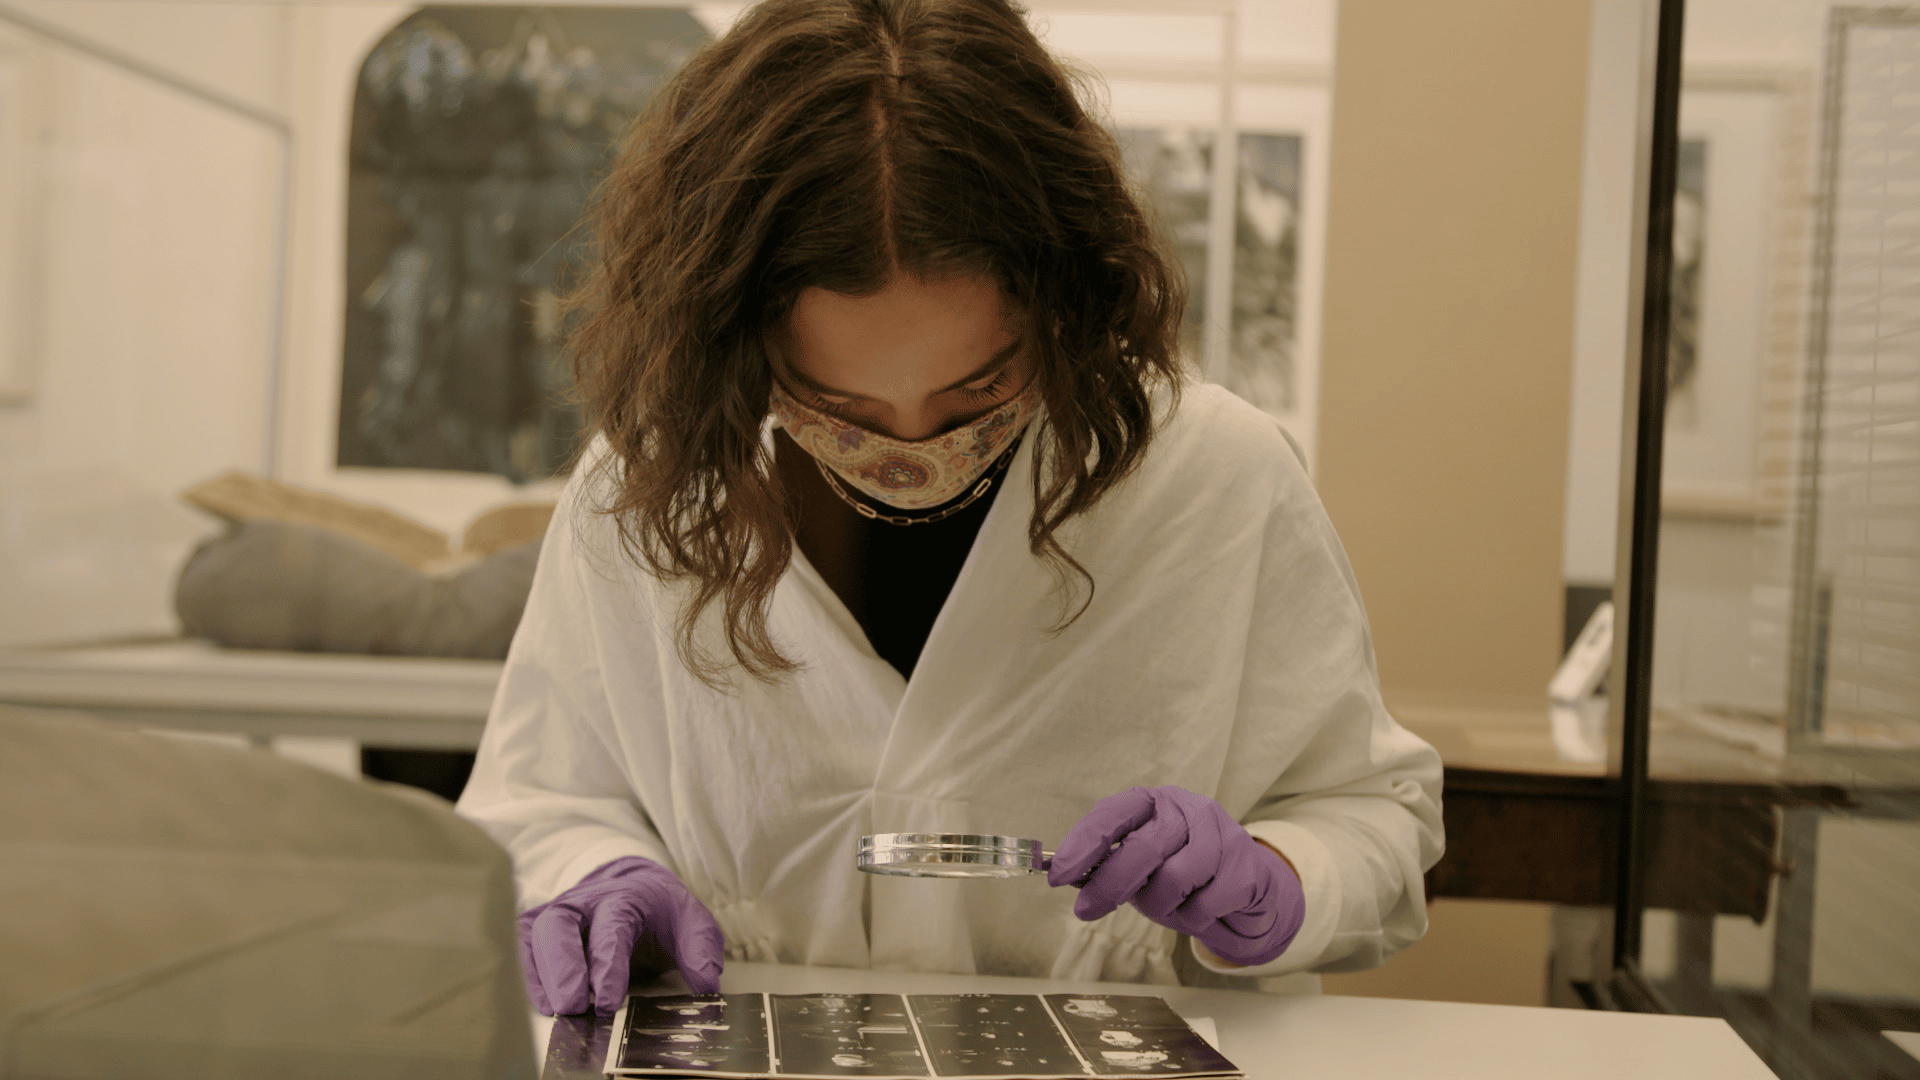 A female intern dressed in a lab coat, gloves and goggles uses a magnifying glass to look at photo negatives in the archive